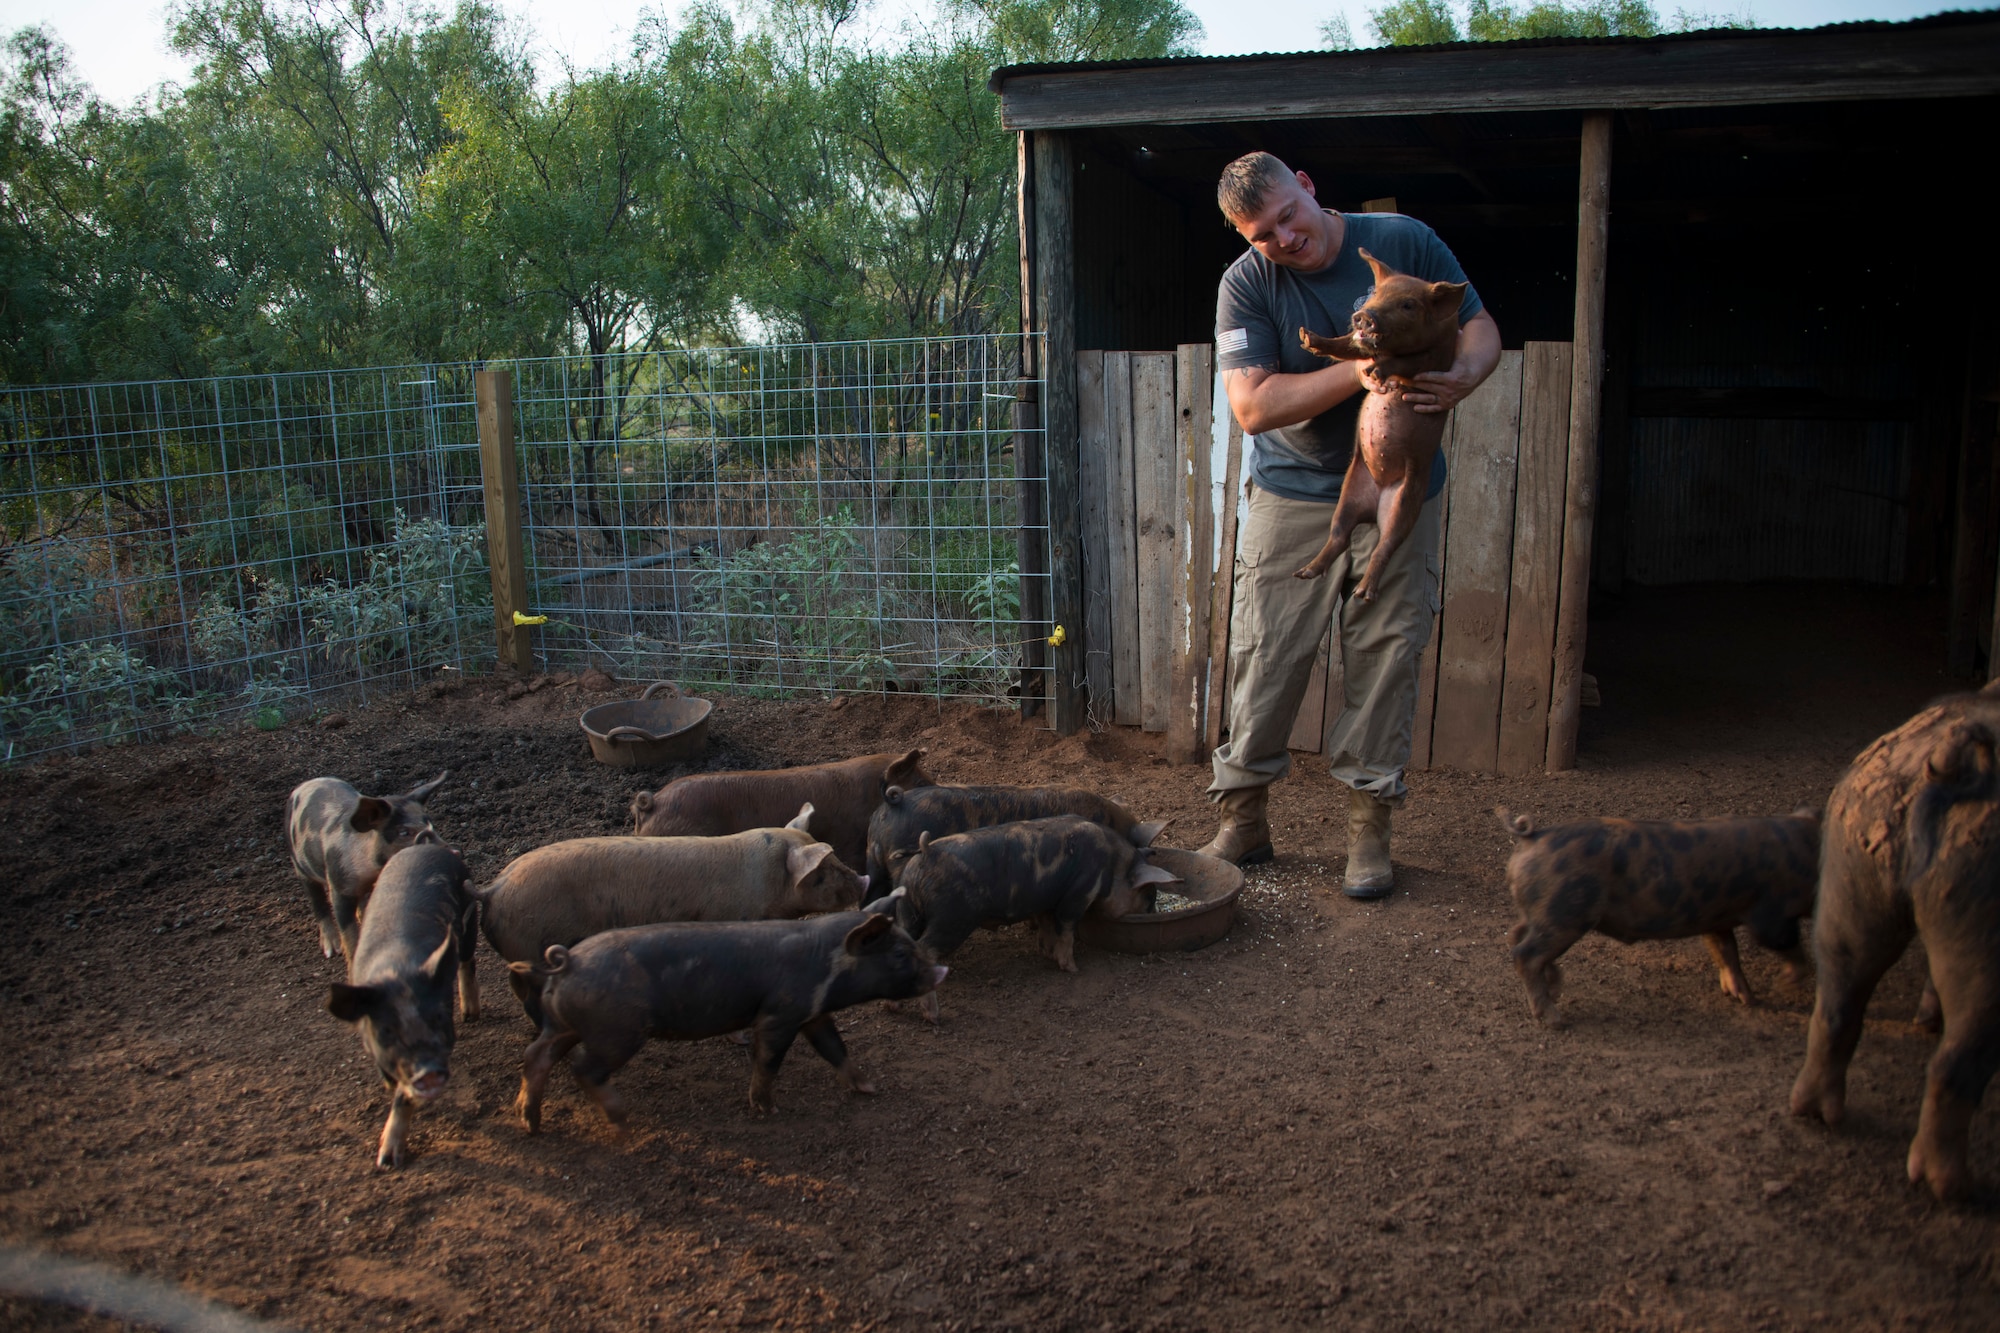 U.S. Air Force Master Sgt. Thomas Kessler, 97th Logistics Readiness Squadron Vehicle Management Flight superintendent, holds a piglet on 1AB Ranch in Altus, Oklahoma, Aug. 5, 2021. The mother, Sooie, gave birth to 10 piglets in May of 2021. (U.S. Air Force photo by Senior Airman Amanda Lovelace)